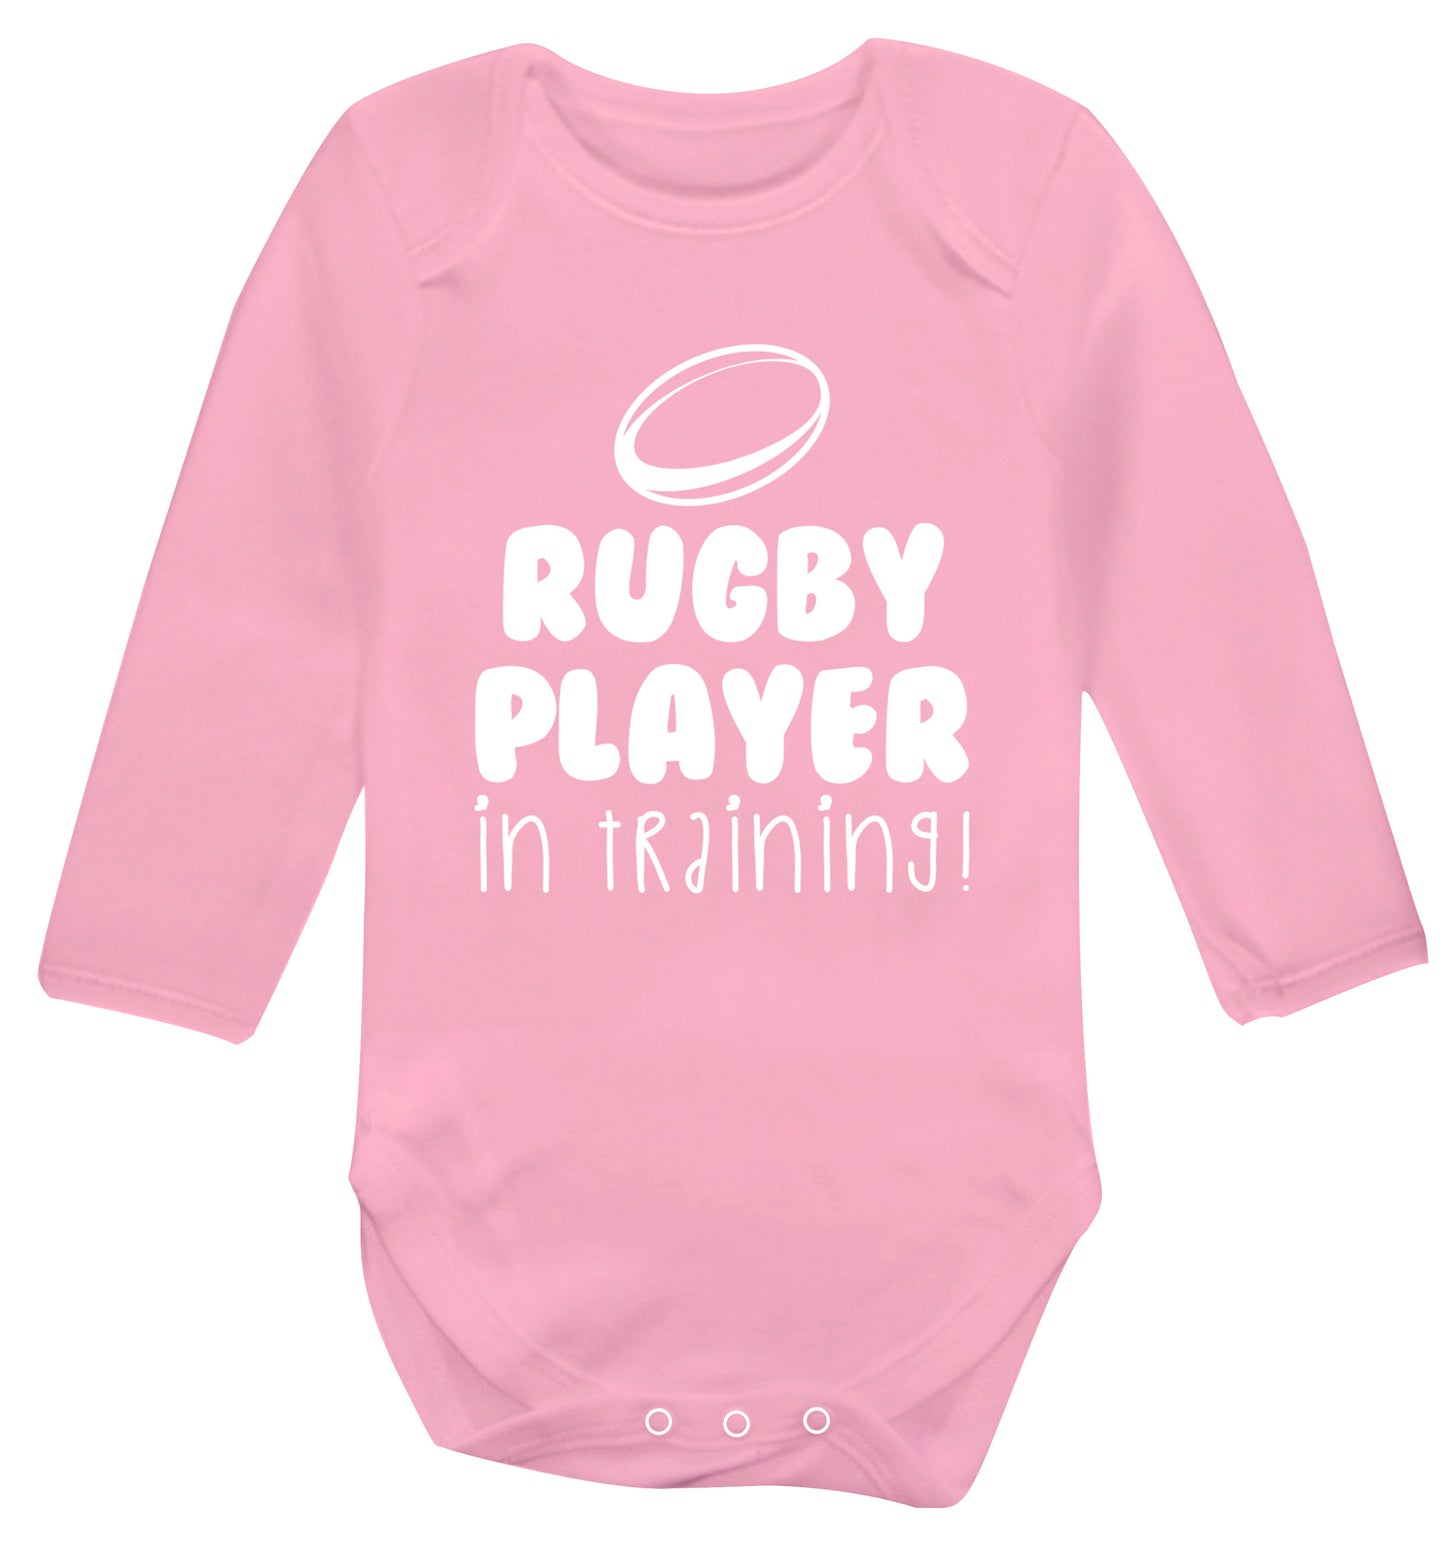 Rugby player in training Baby Vest long sleeved pale pink 6-12 months